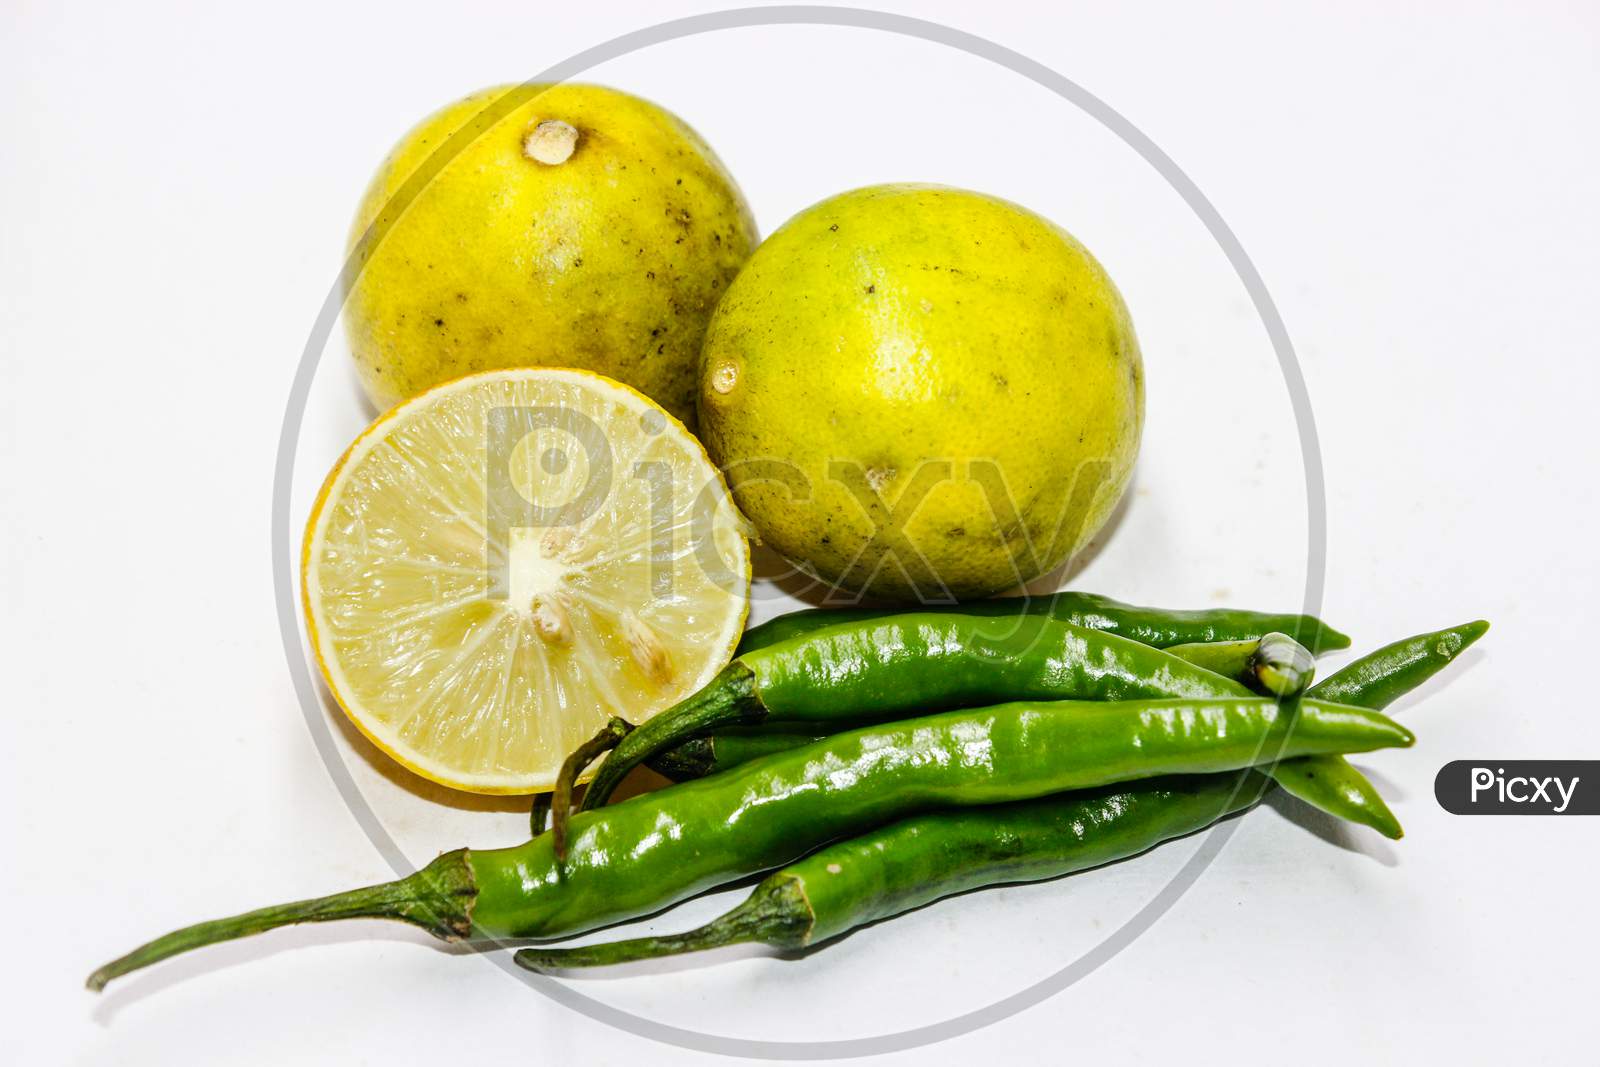 Lemon  And Green Chilles Over An Isolated White Background